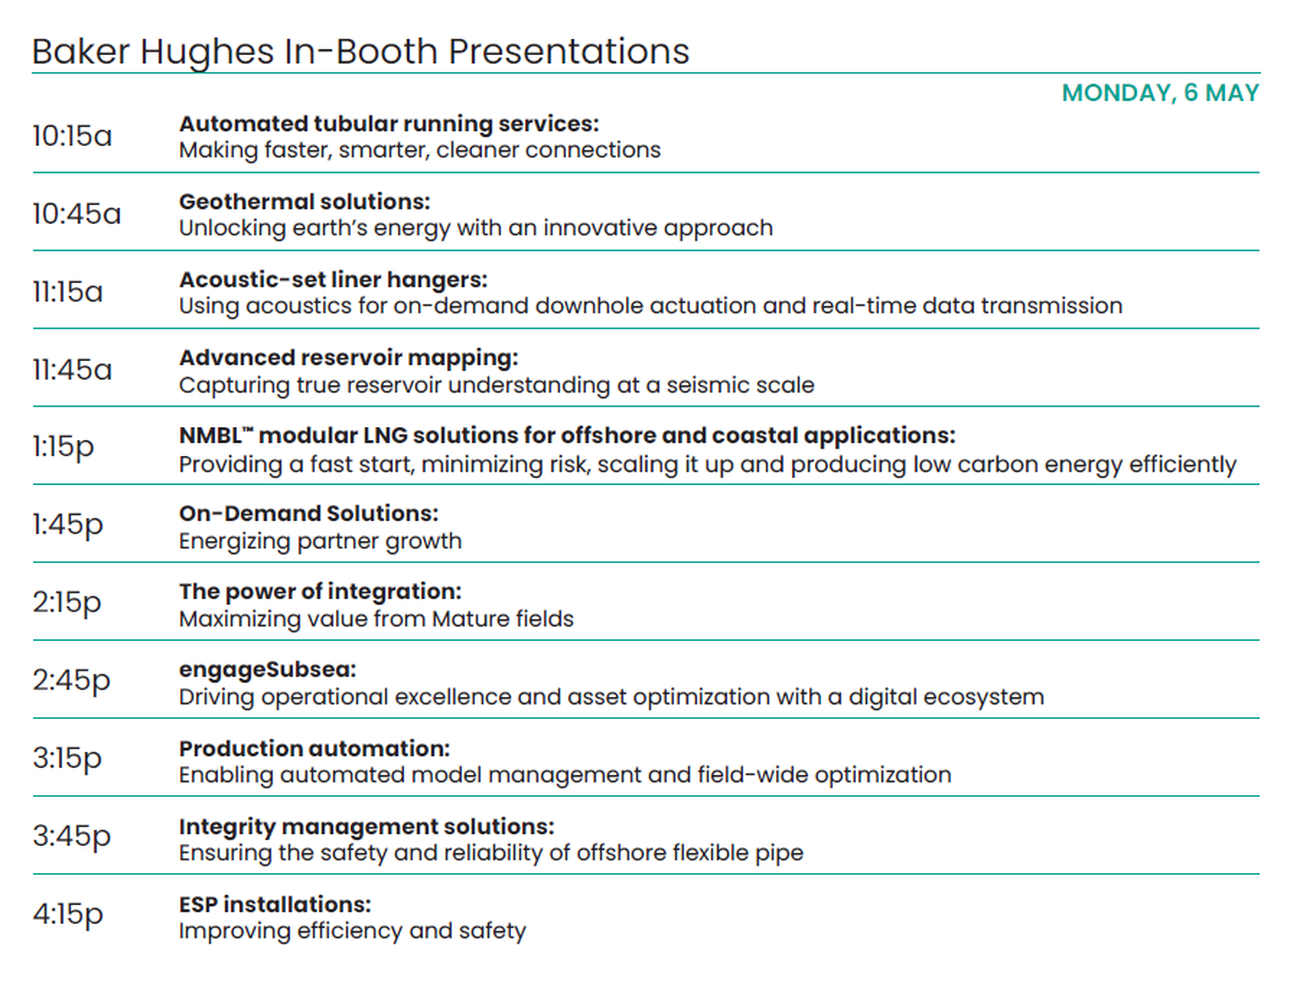 Baker Hughes In-Booth Schedule Day 1